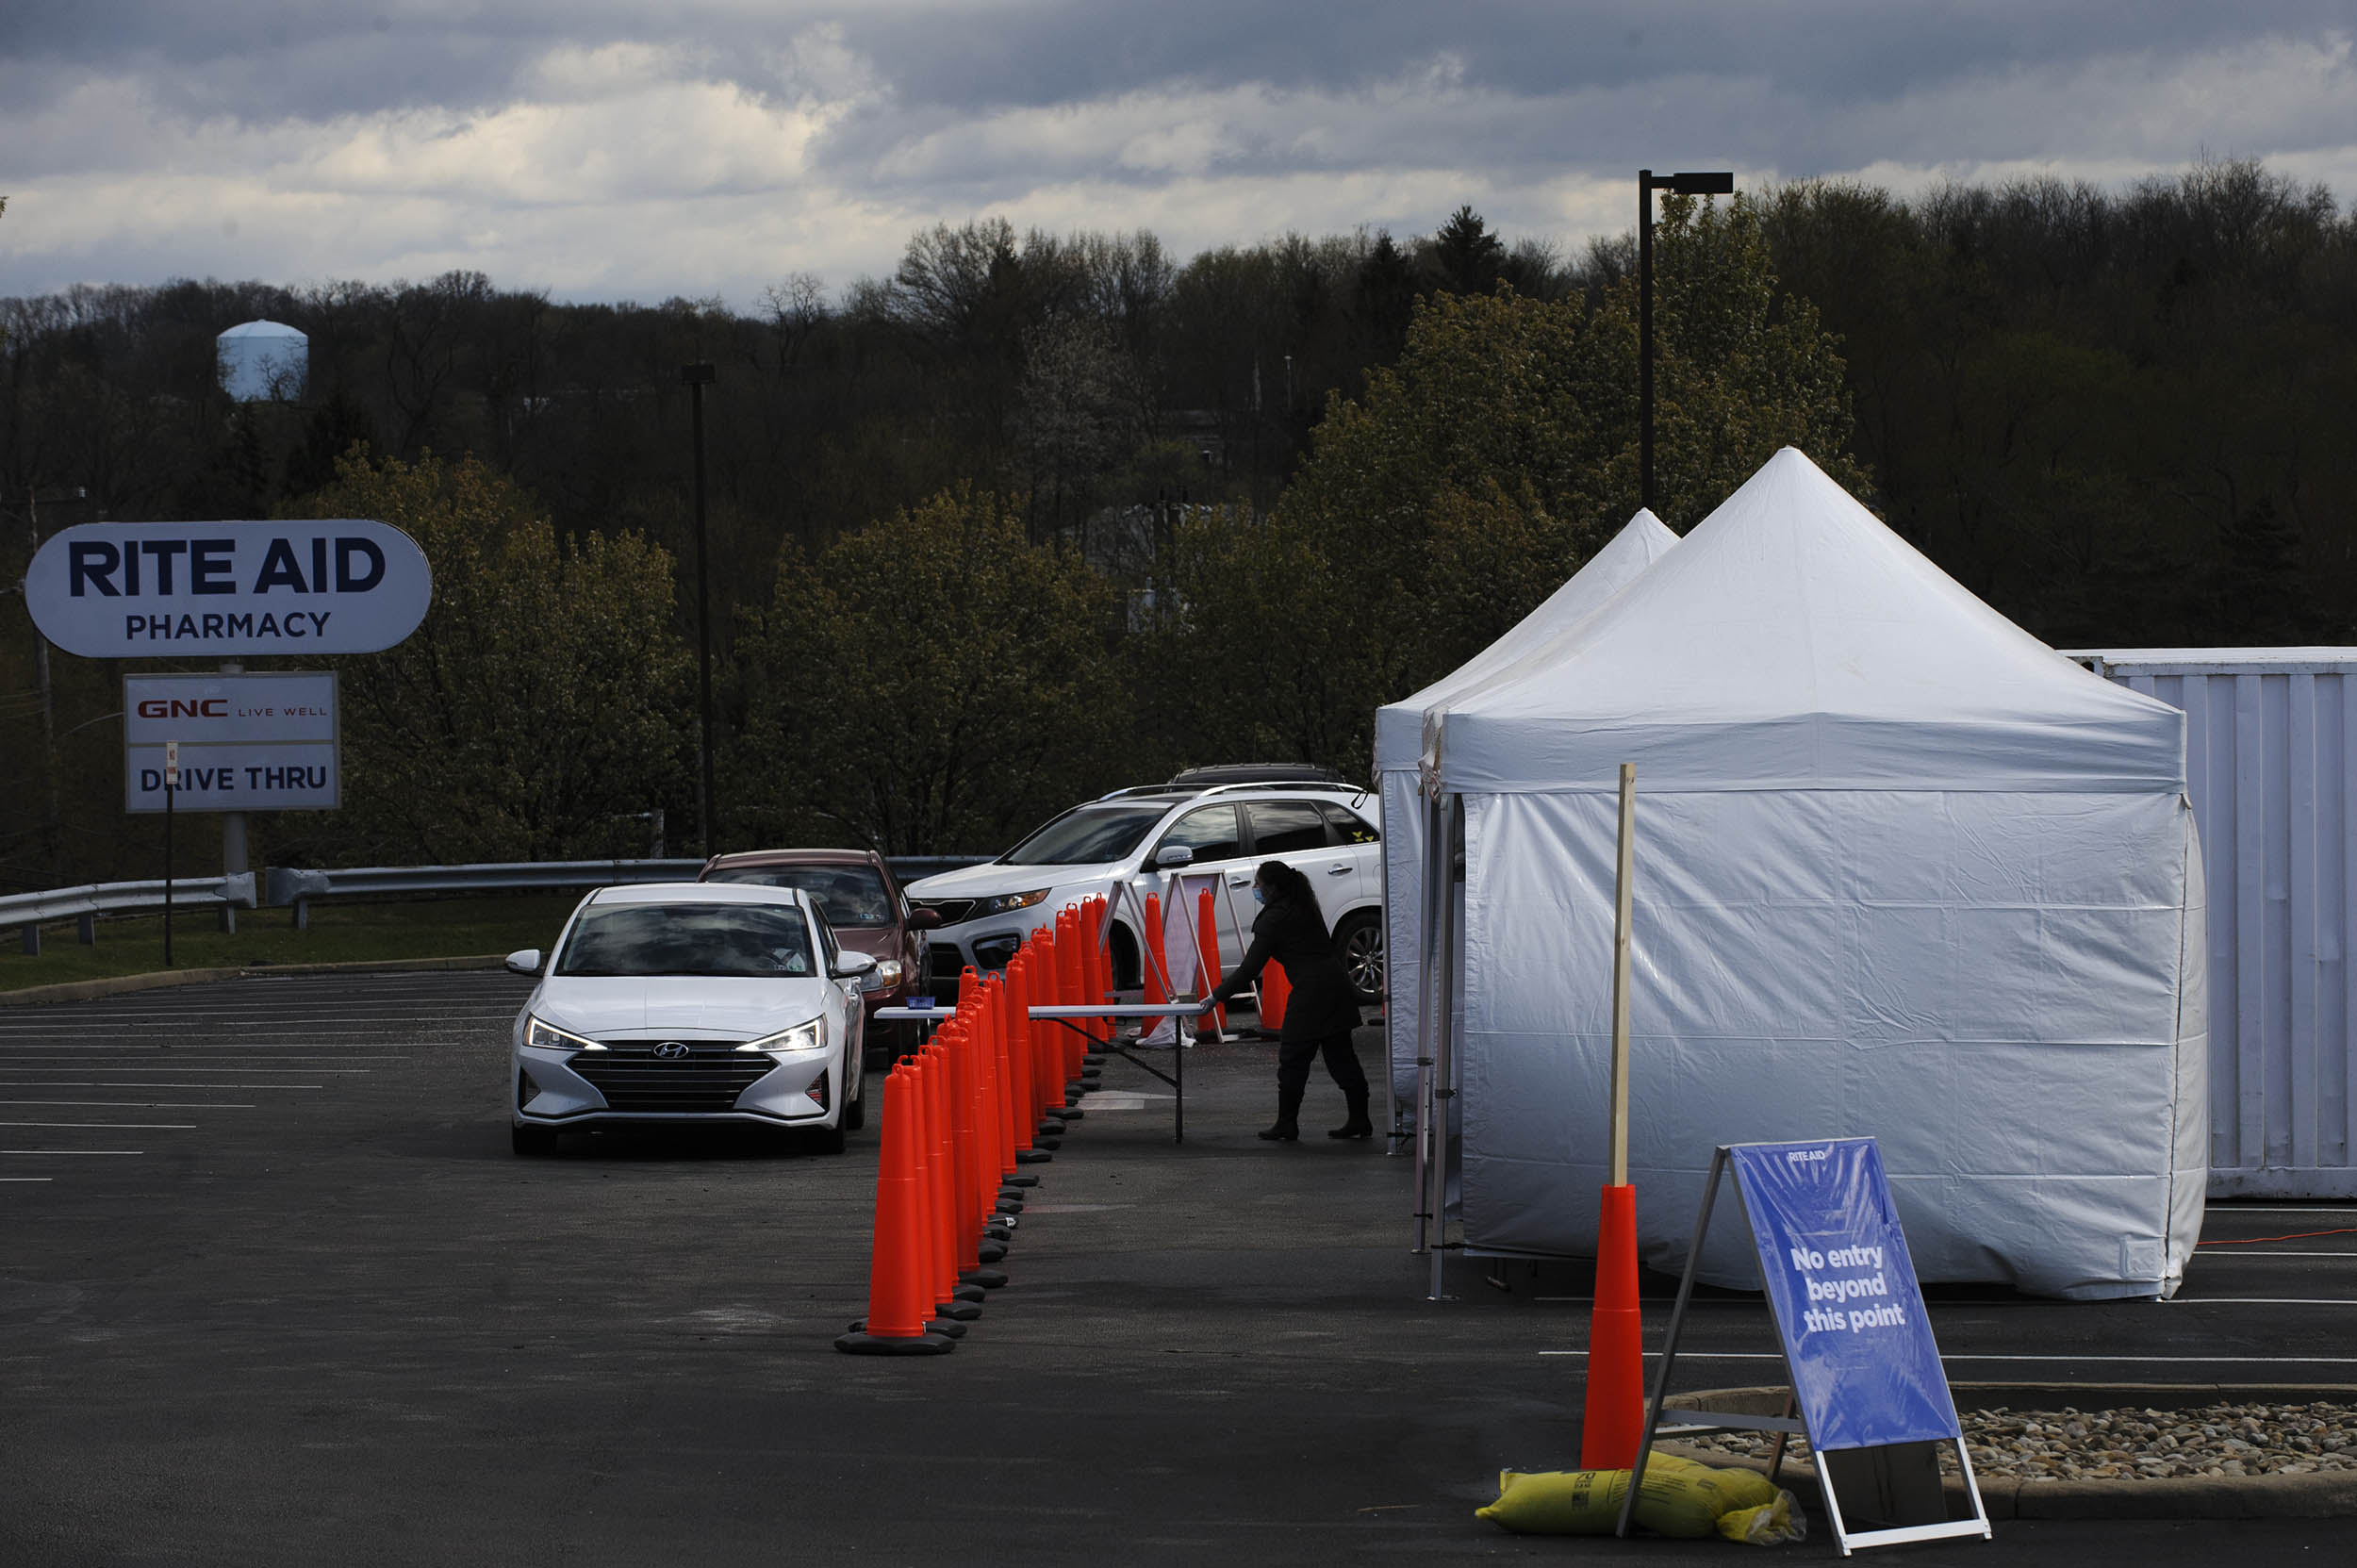 Residents in vehicles wait in line to enter a Rite Aid Corp. Covid-19 testing facility in Monroeville, Pennsylvania, on Tuesday, April 21.